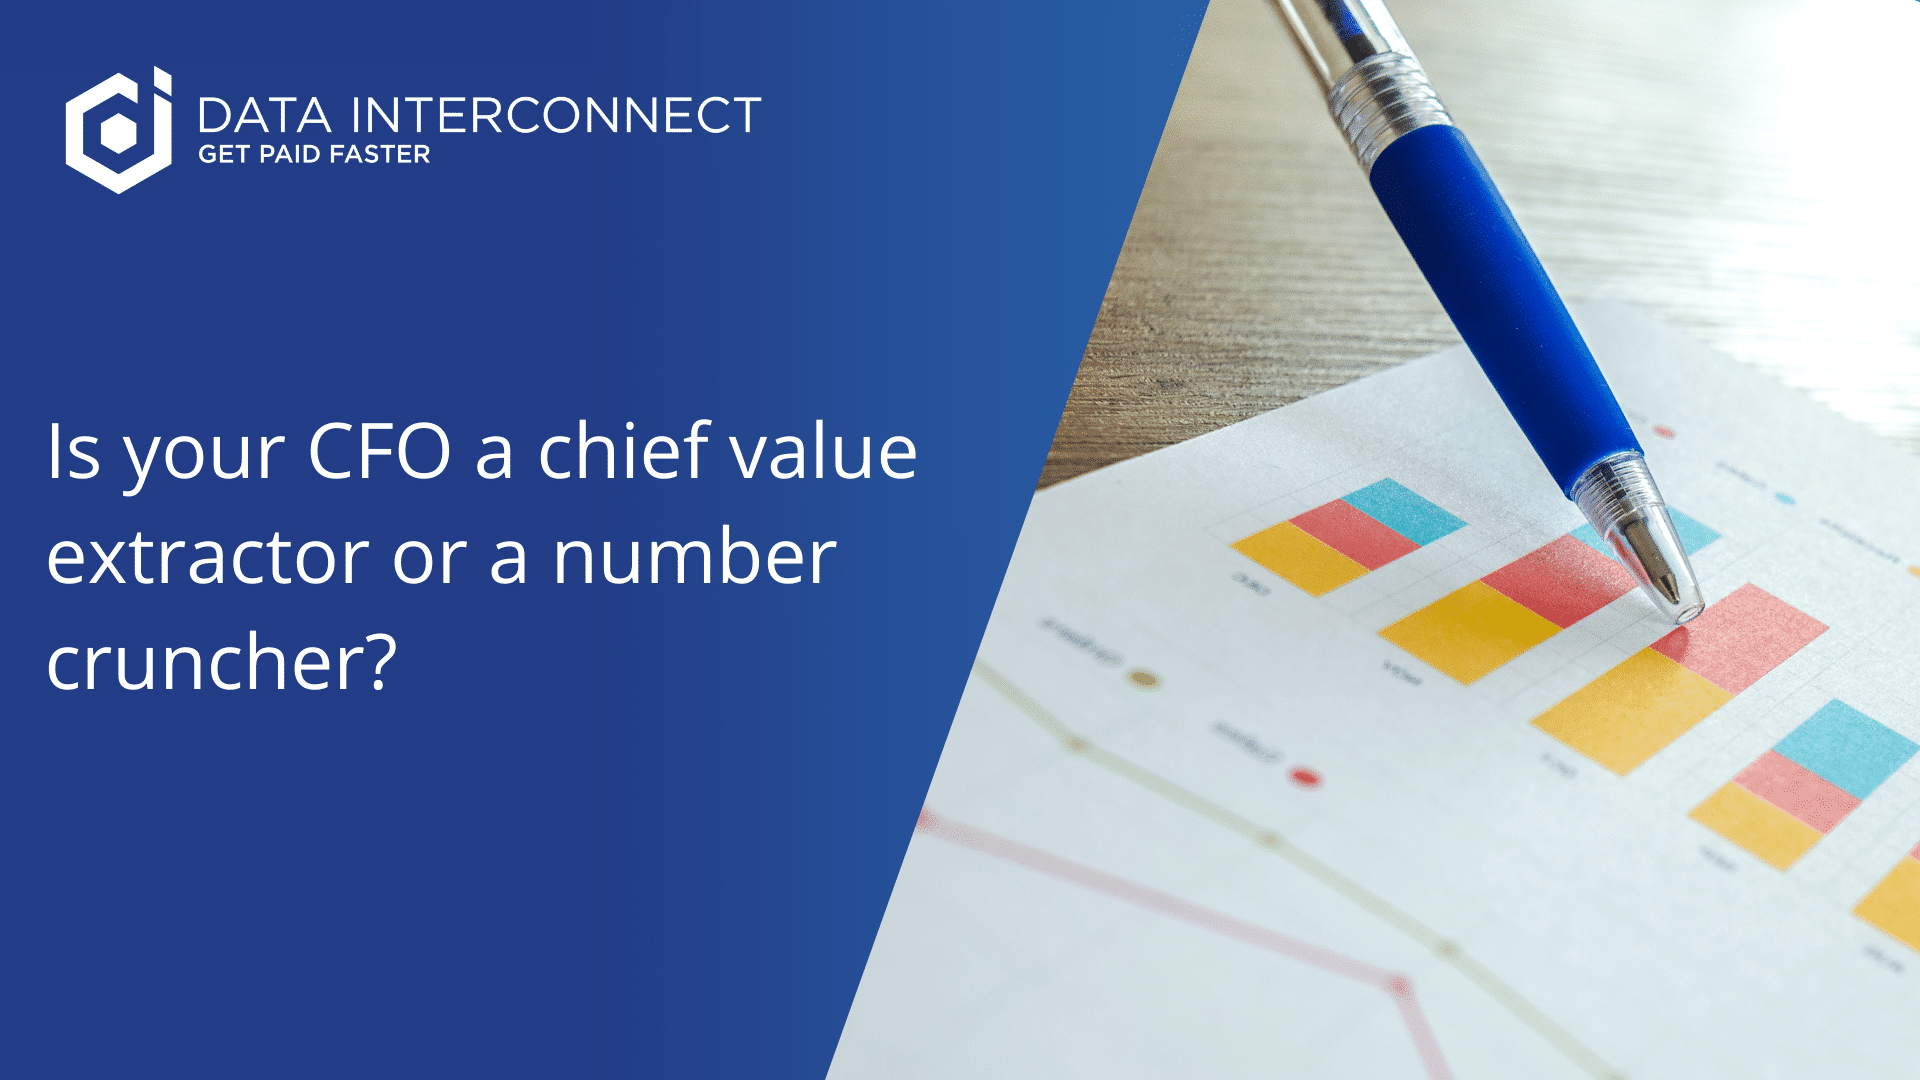 Is your CFO a chief value extractor or a number cruncher?